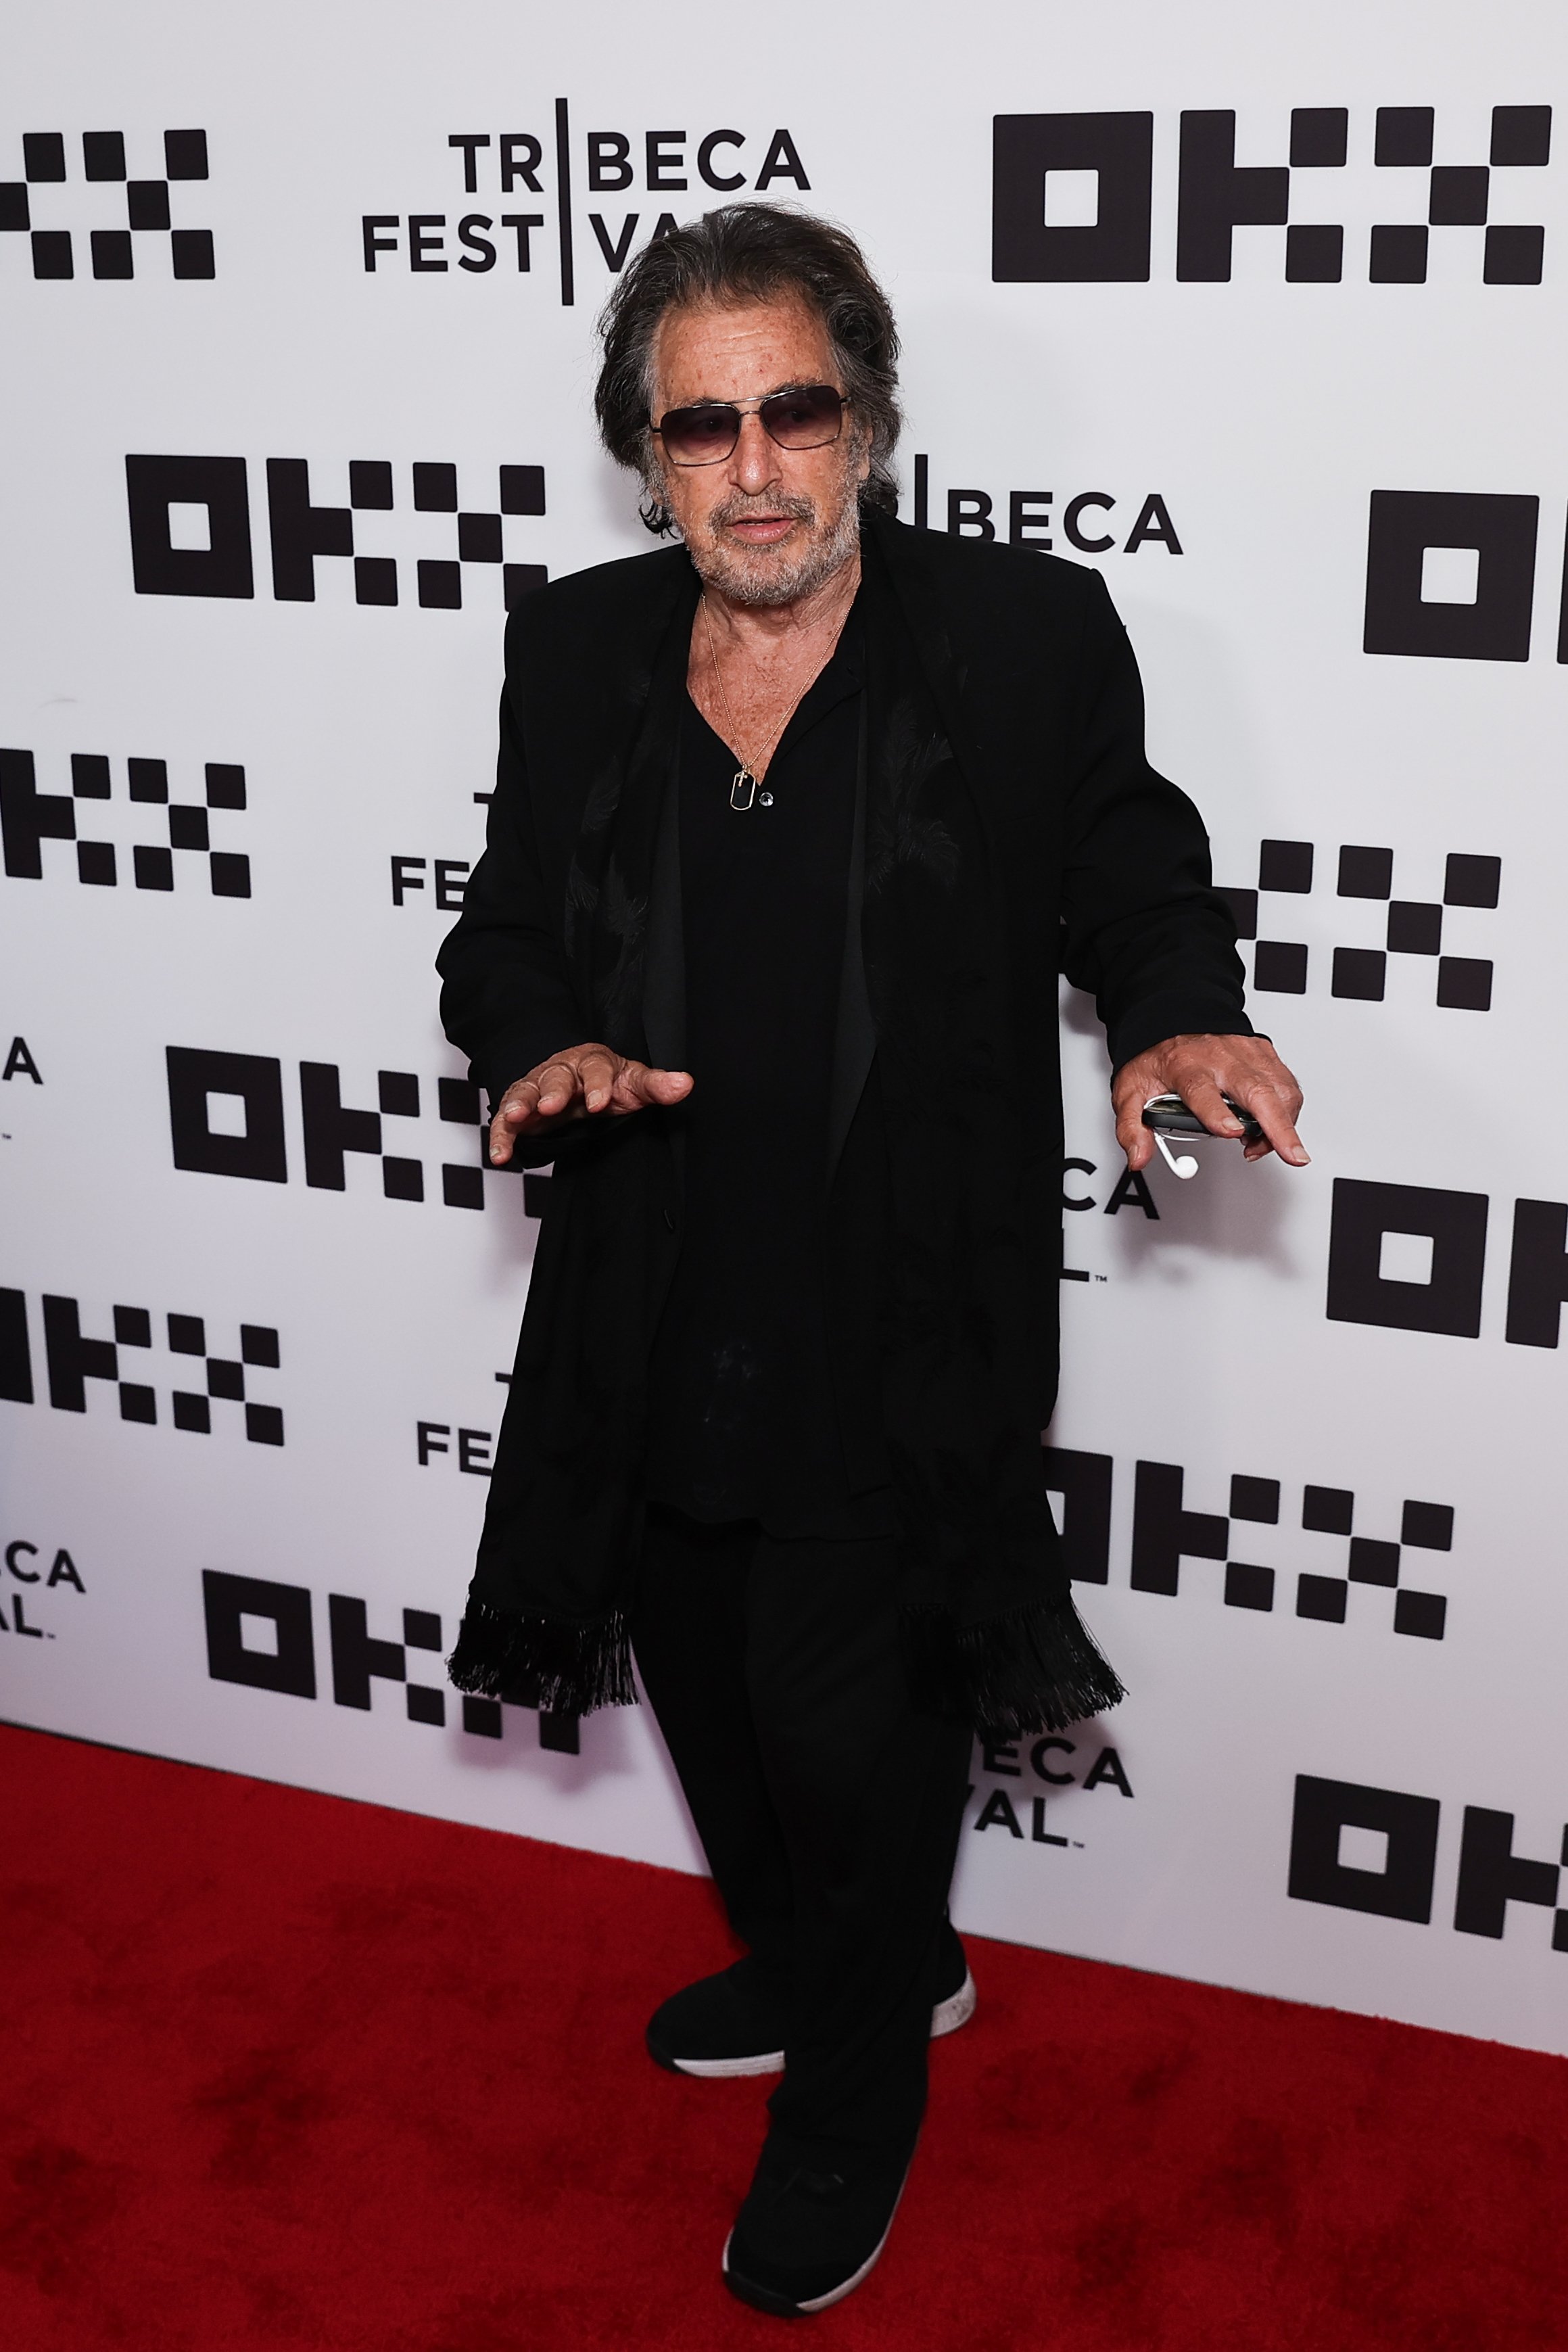 Actor Al Pacino poses on the Red Carpet of 'HEAT' at 2022 Tribeca Festival in New York City, United States on June 17, 2022 | Source: Getty Images